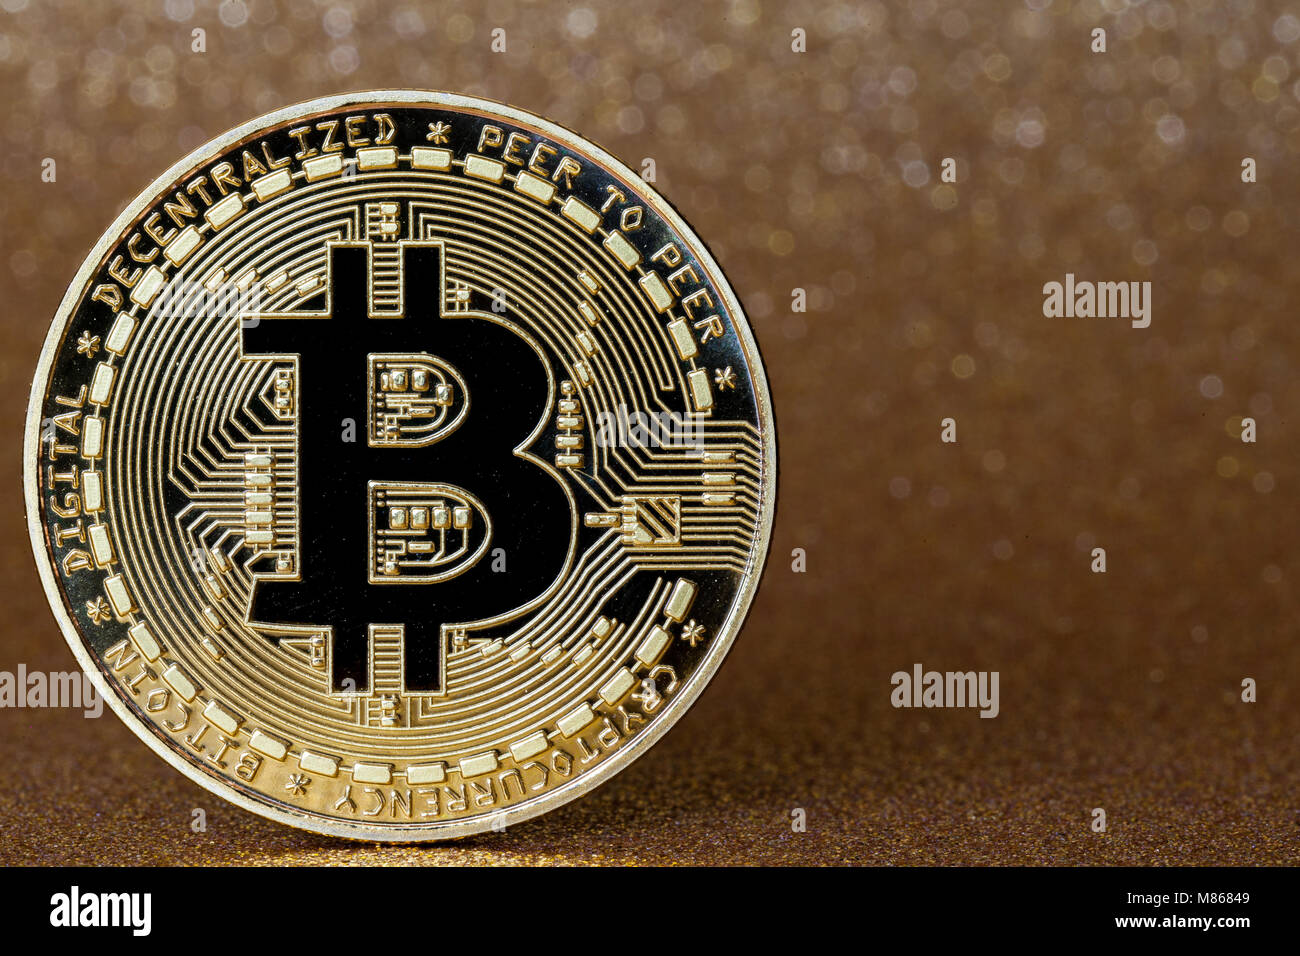 Golden bitcoin cryptocurrency on glittery golden background Stock Photo